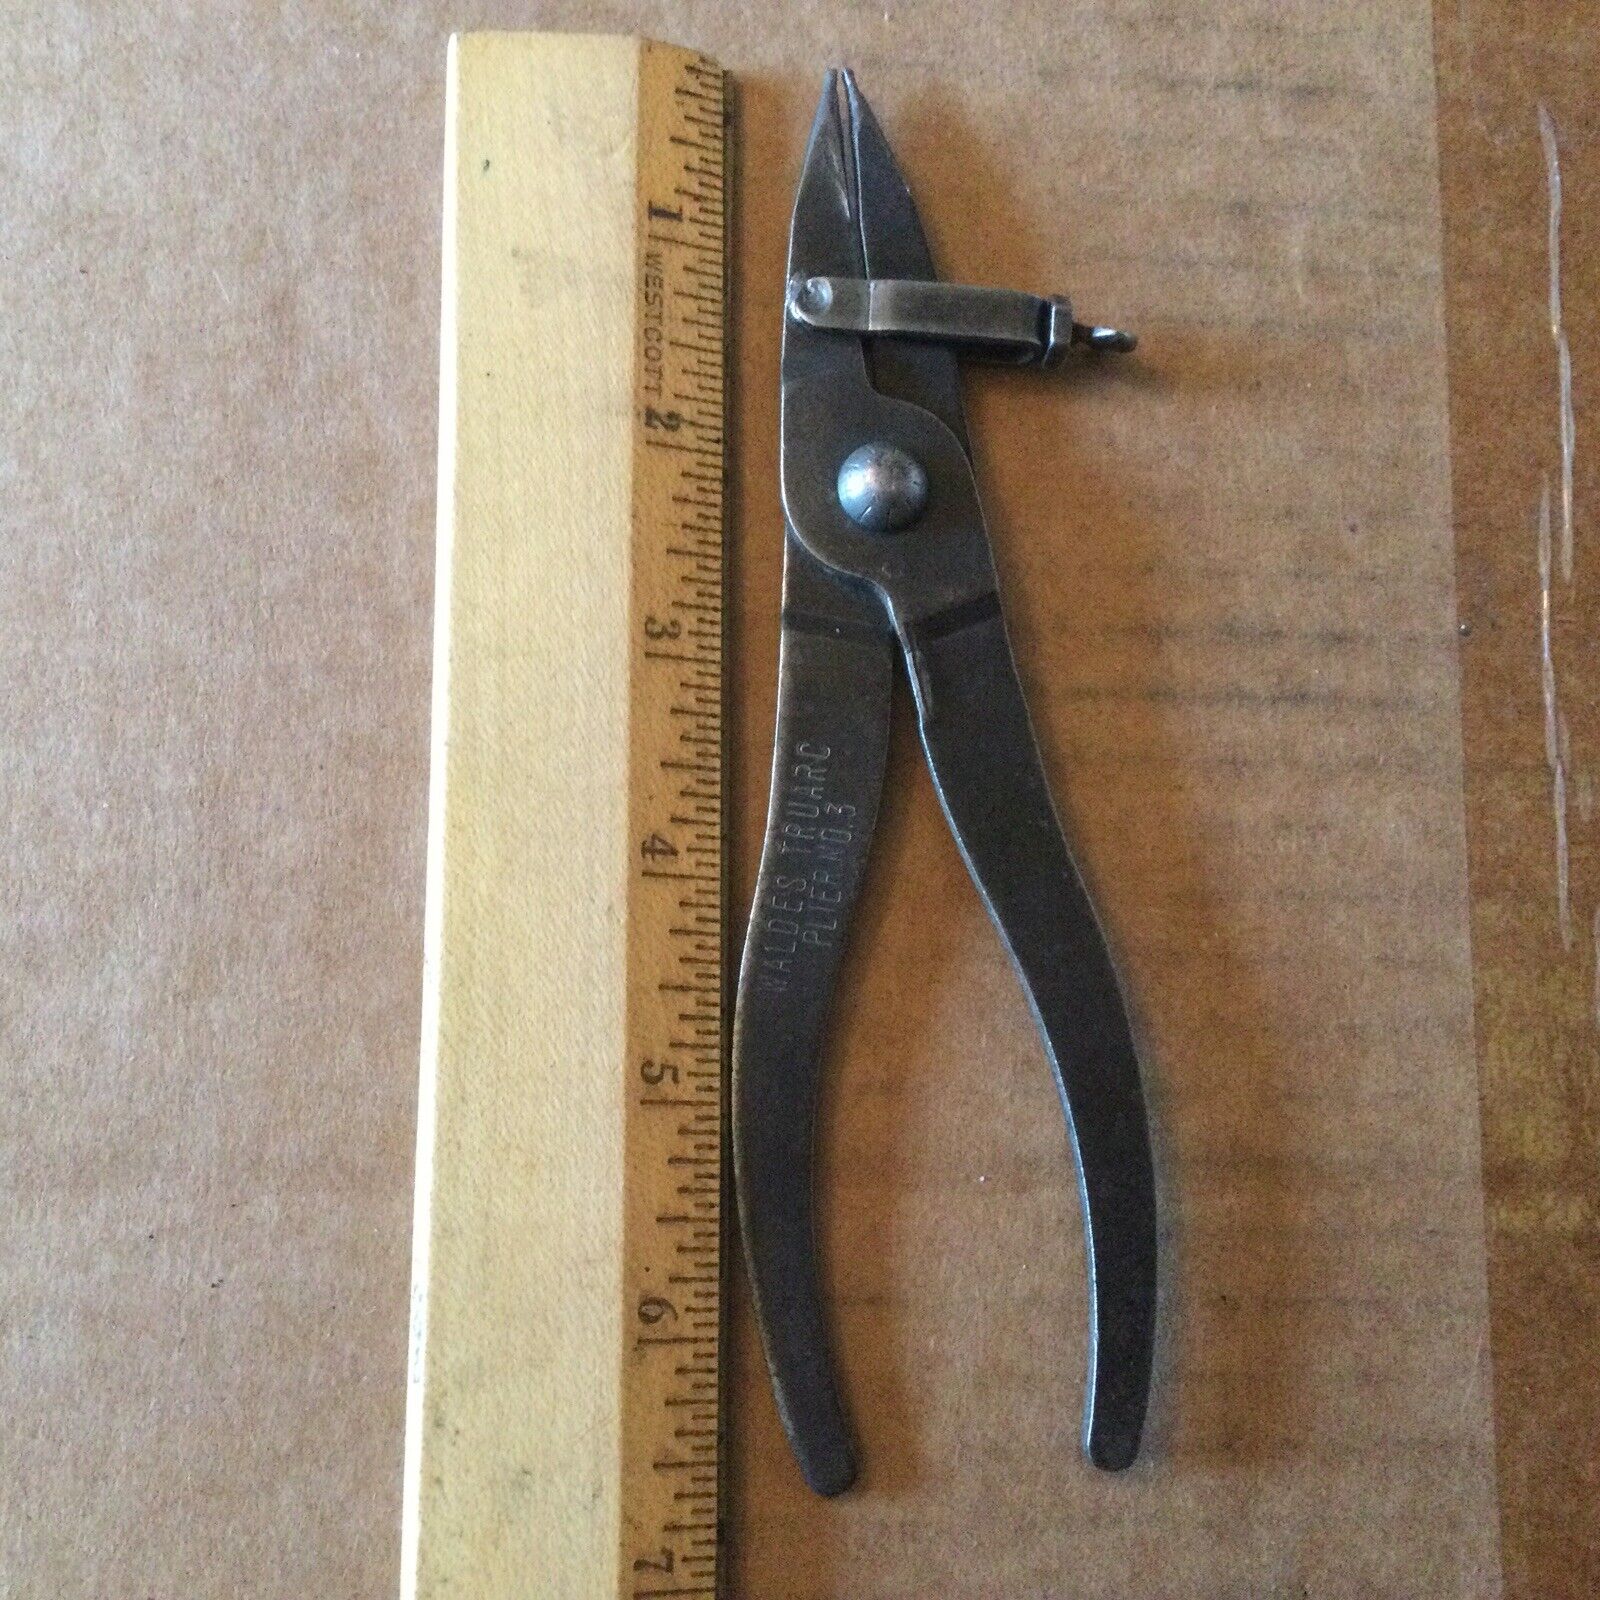 Vintage - Waldes Truarc Snap Ring Pliers No. 3 - Used